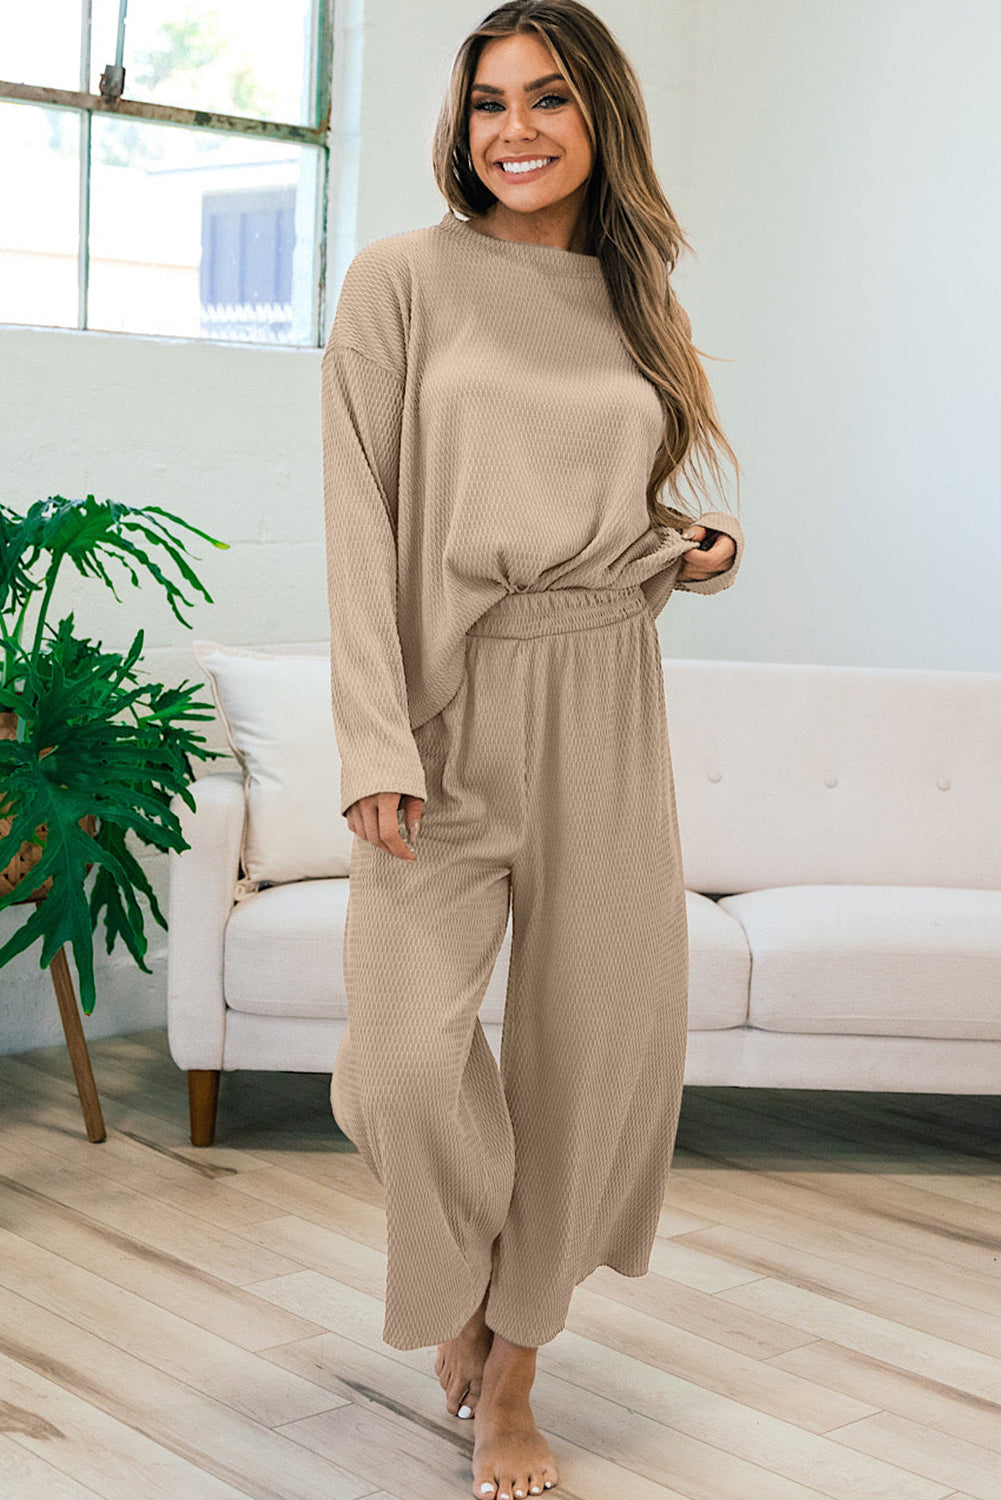 Smoke Gray Loose Textured Pullover and Pants Outfit